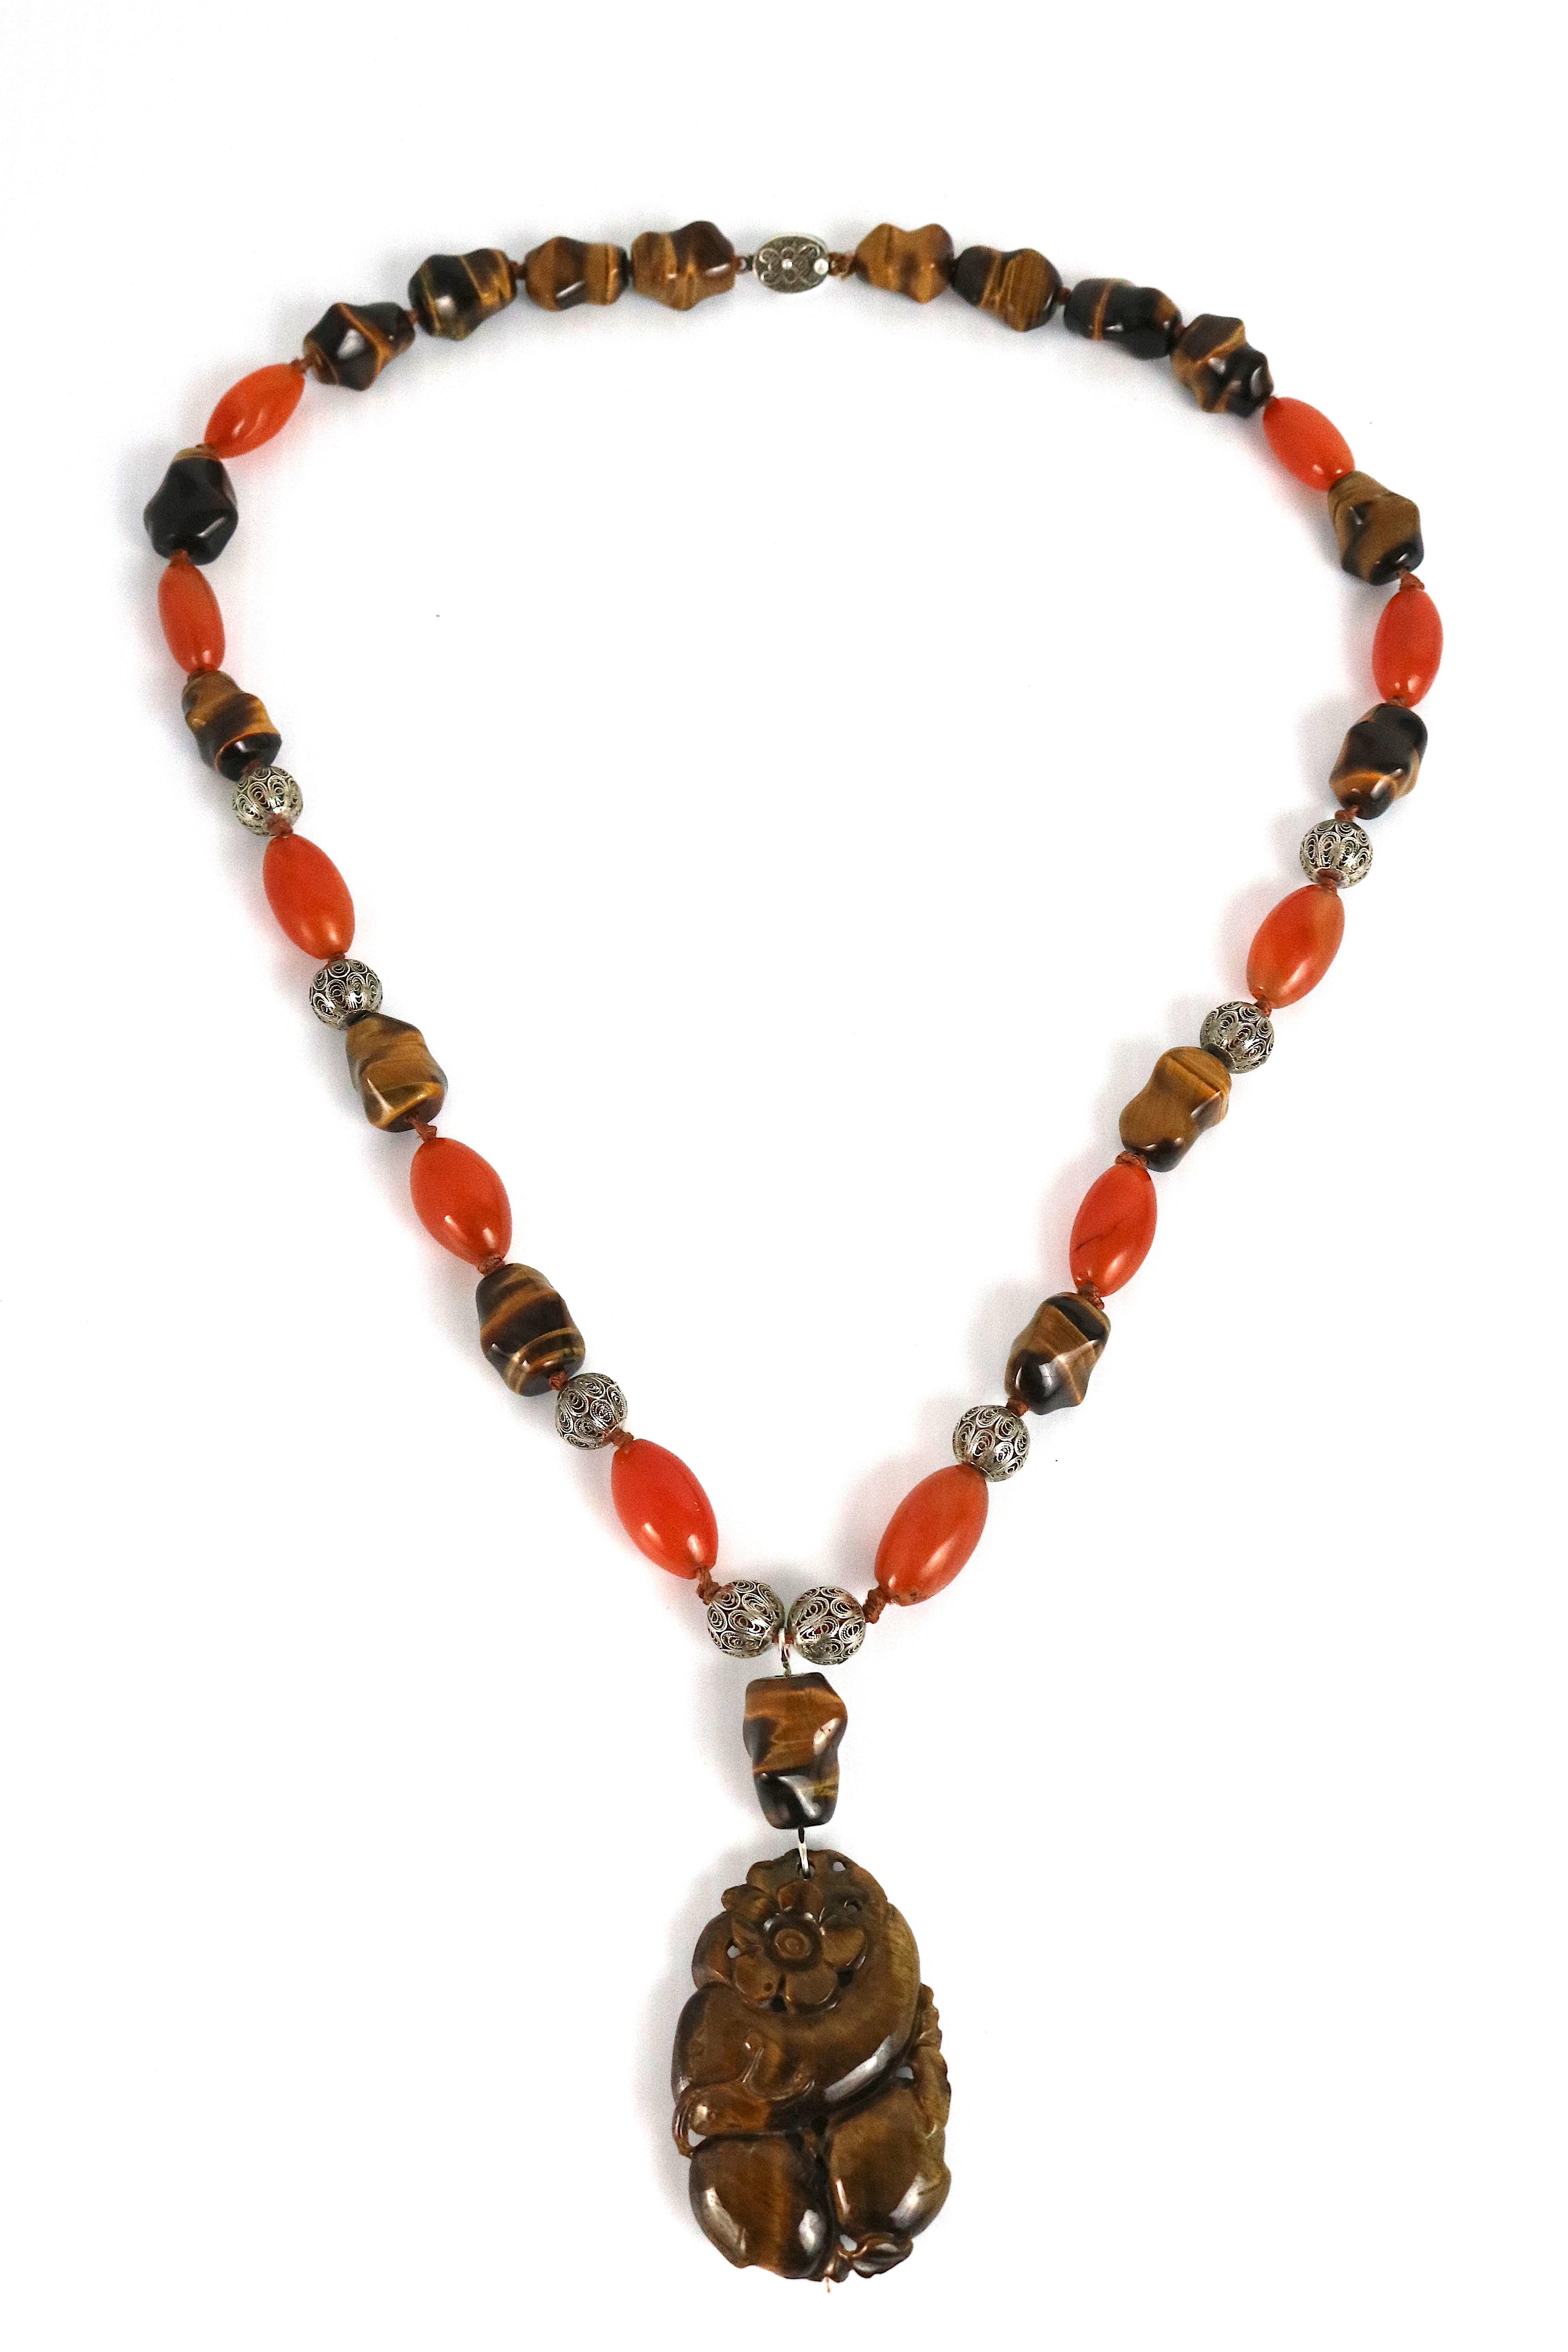 Egyptian Revival Tiger Eye Carved Pendant Necklace-Sterling, Carnelian, Tiger Eye Beads For Sale